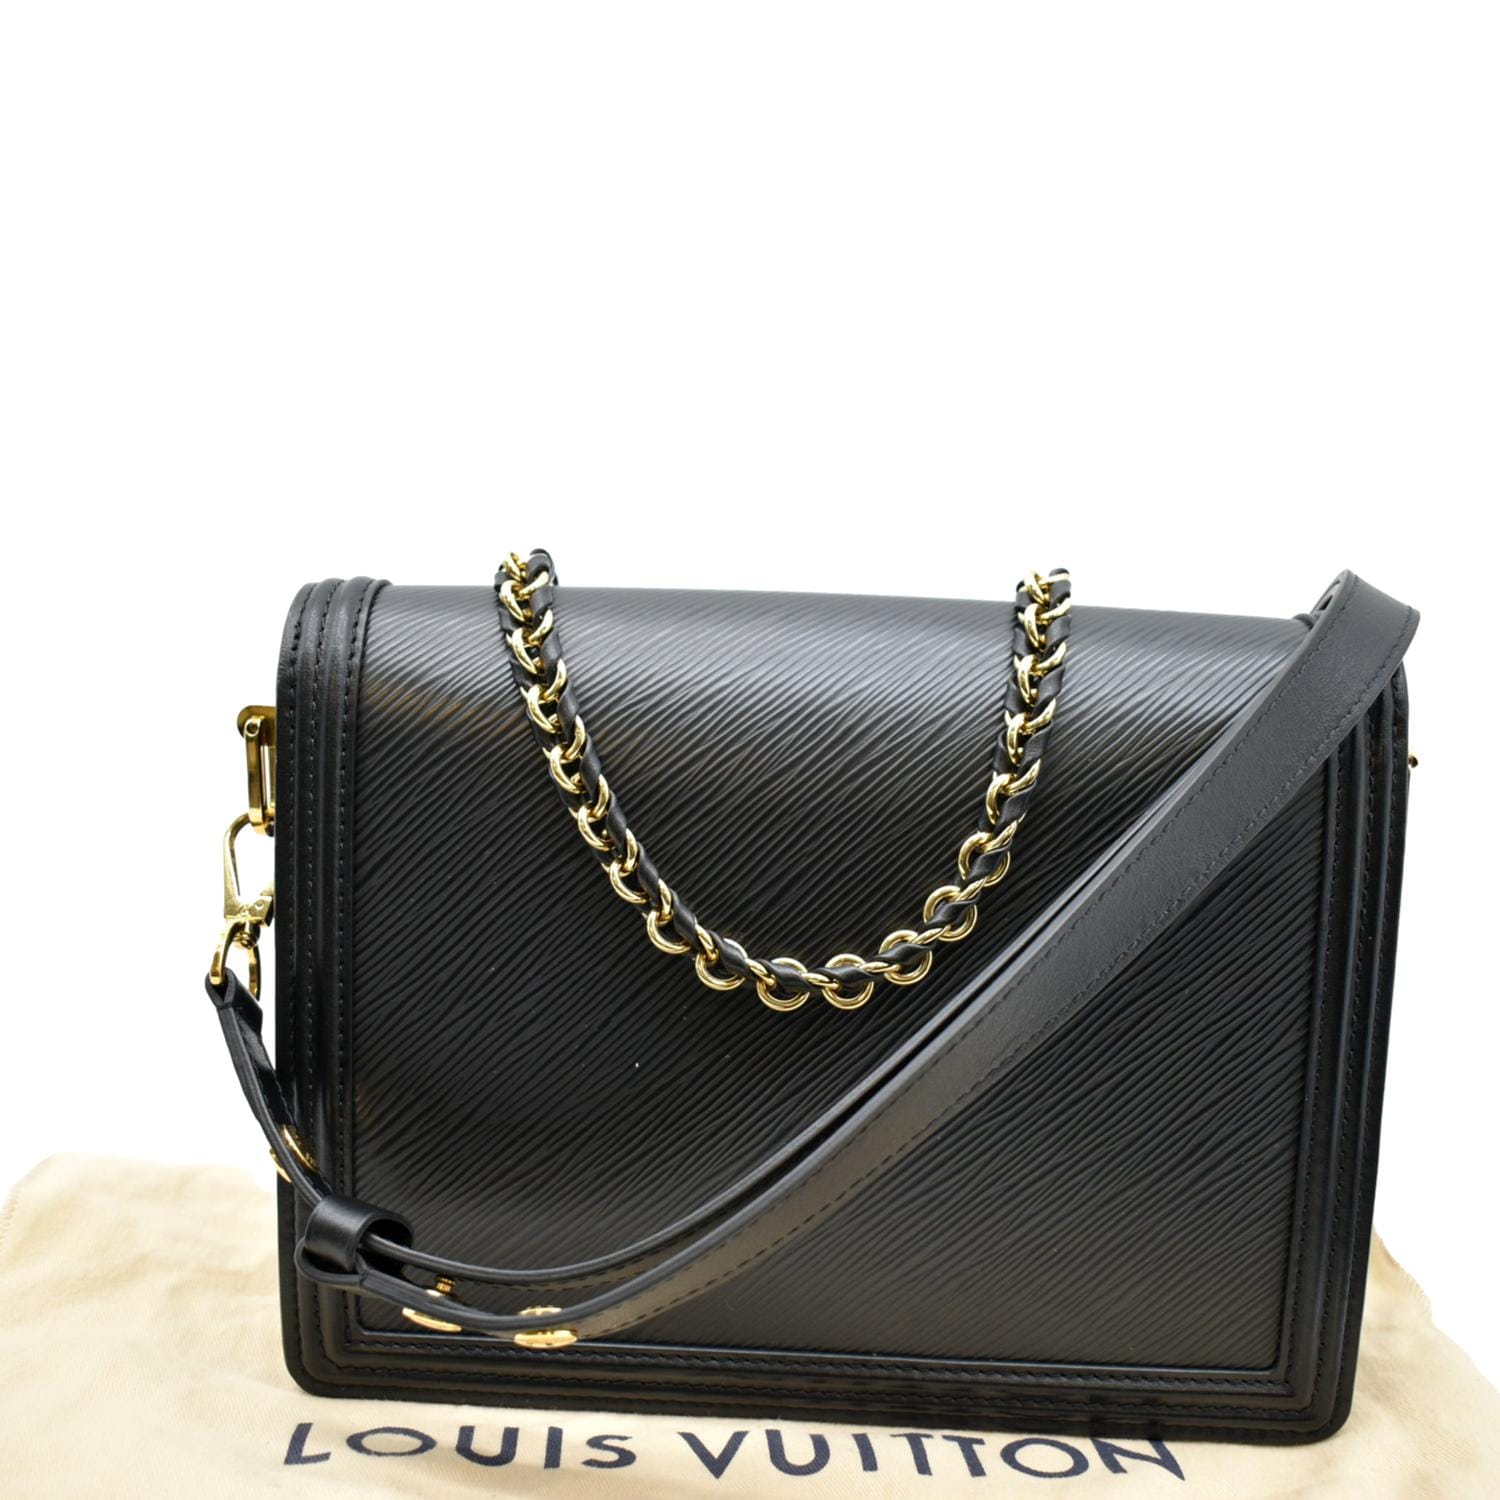 Louis Vuitton Dauphine Black Leather Clutch Bag (Pre-Owned)